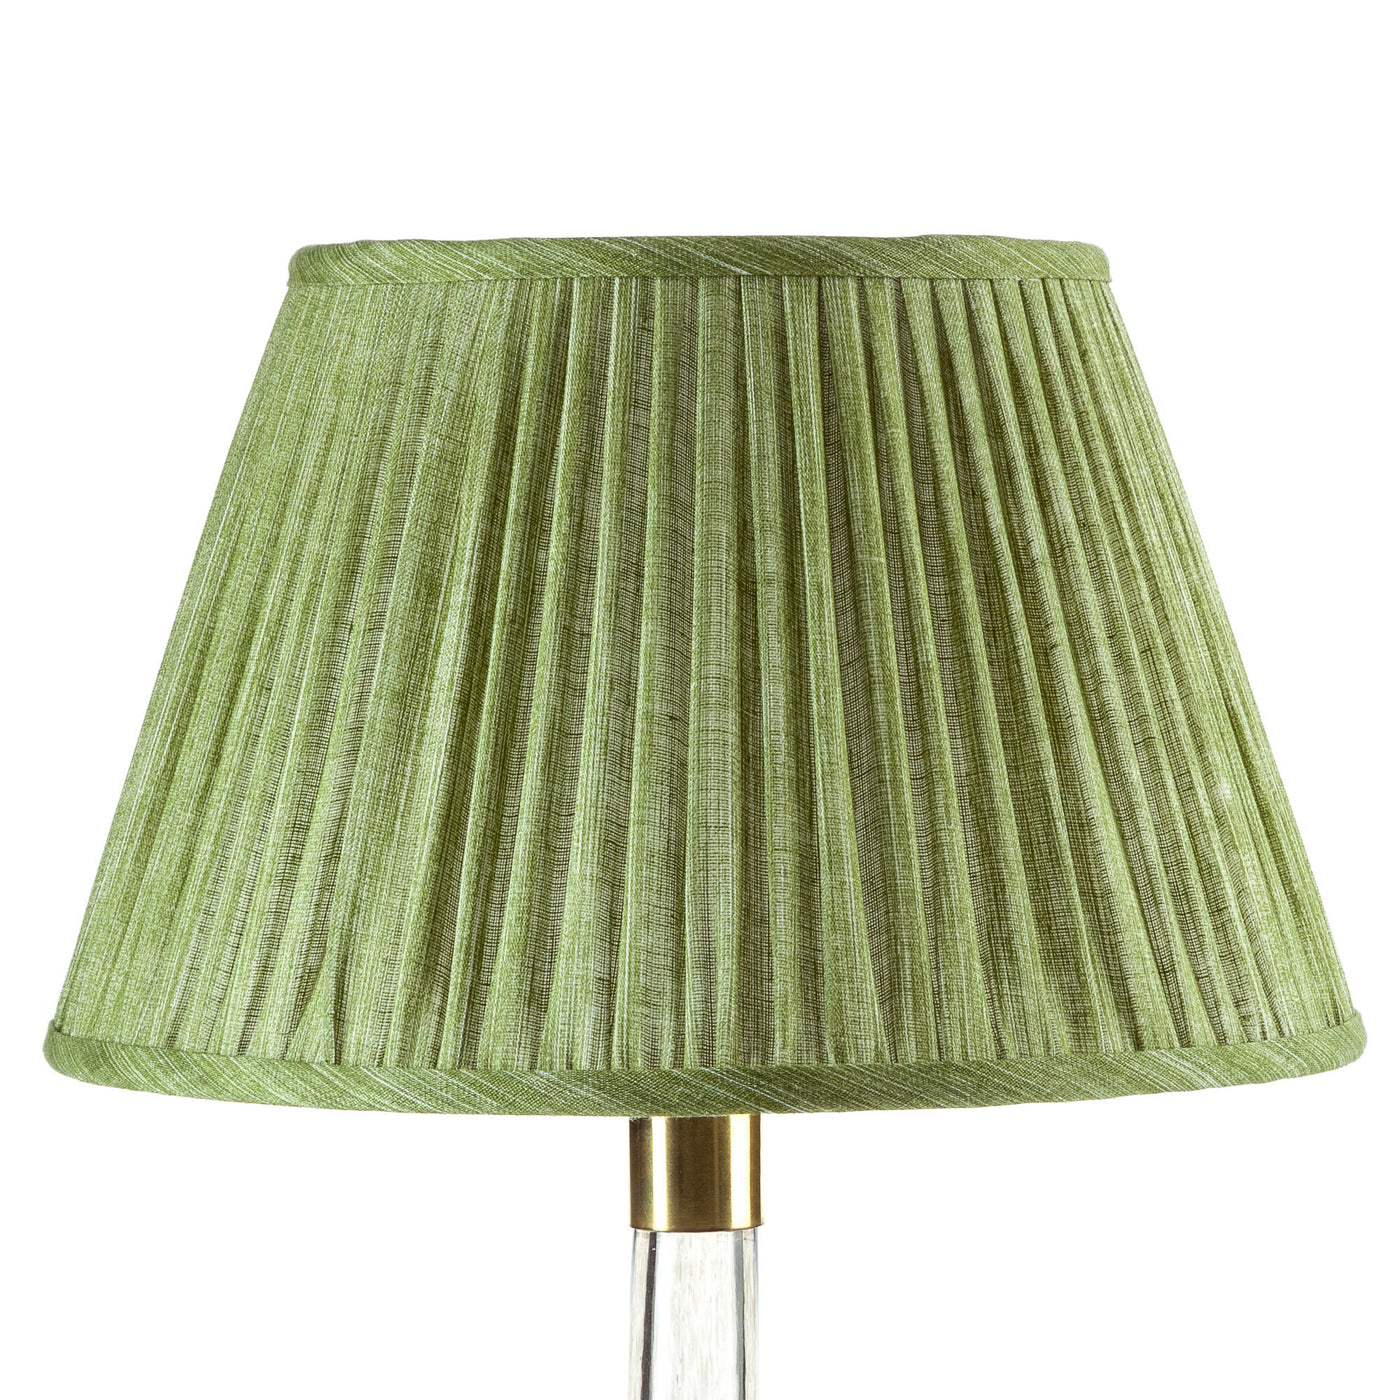 18" Fermoie Lampshade - Plain Linen in Kintyre Green  | Newport Lamp And Shade | Located in Newport, RI